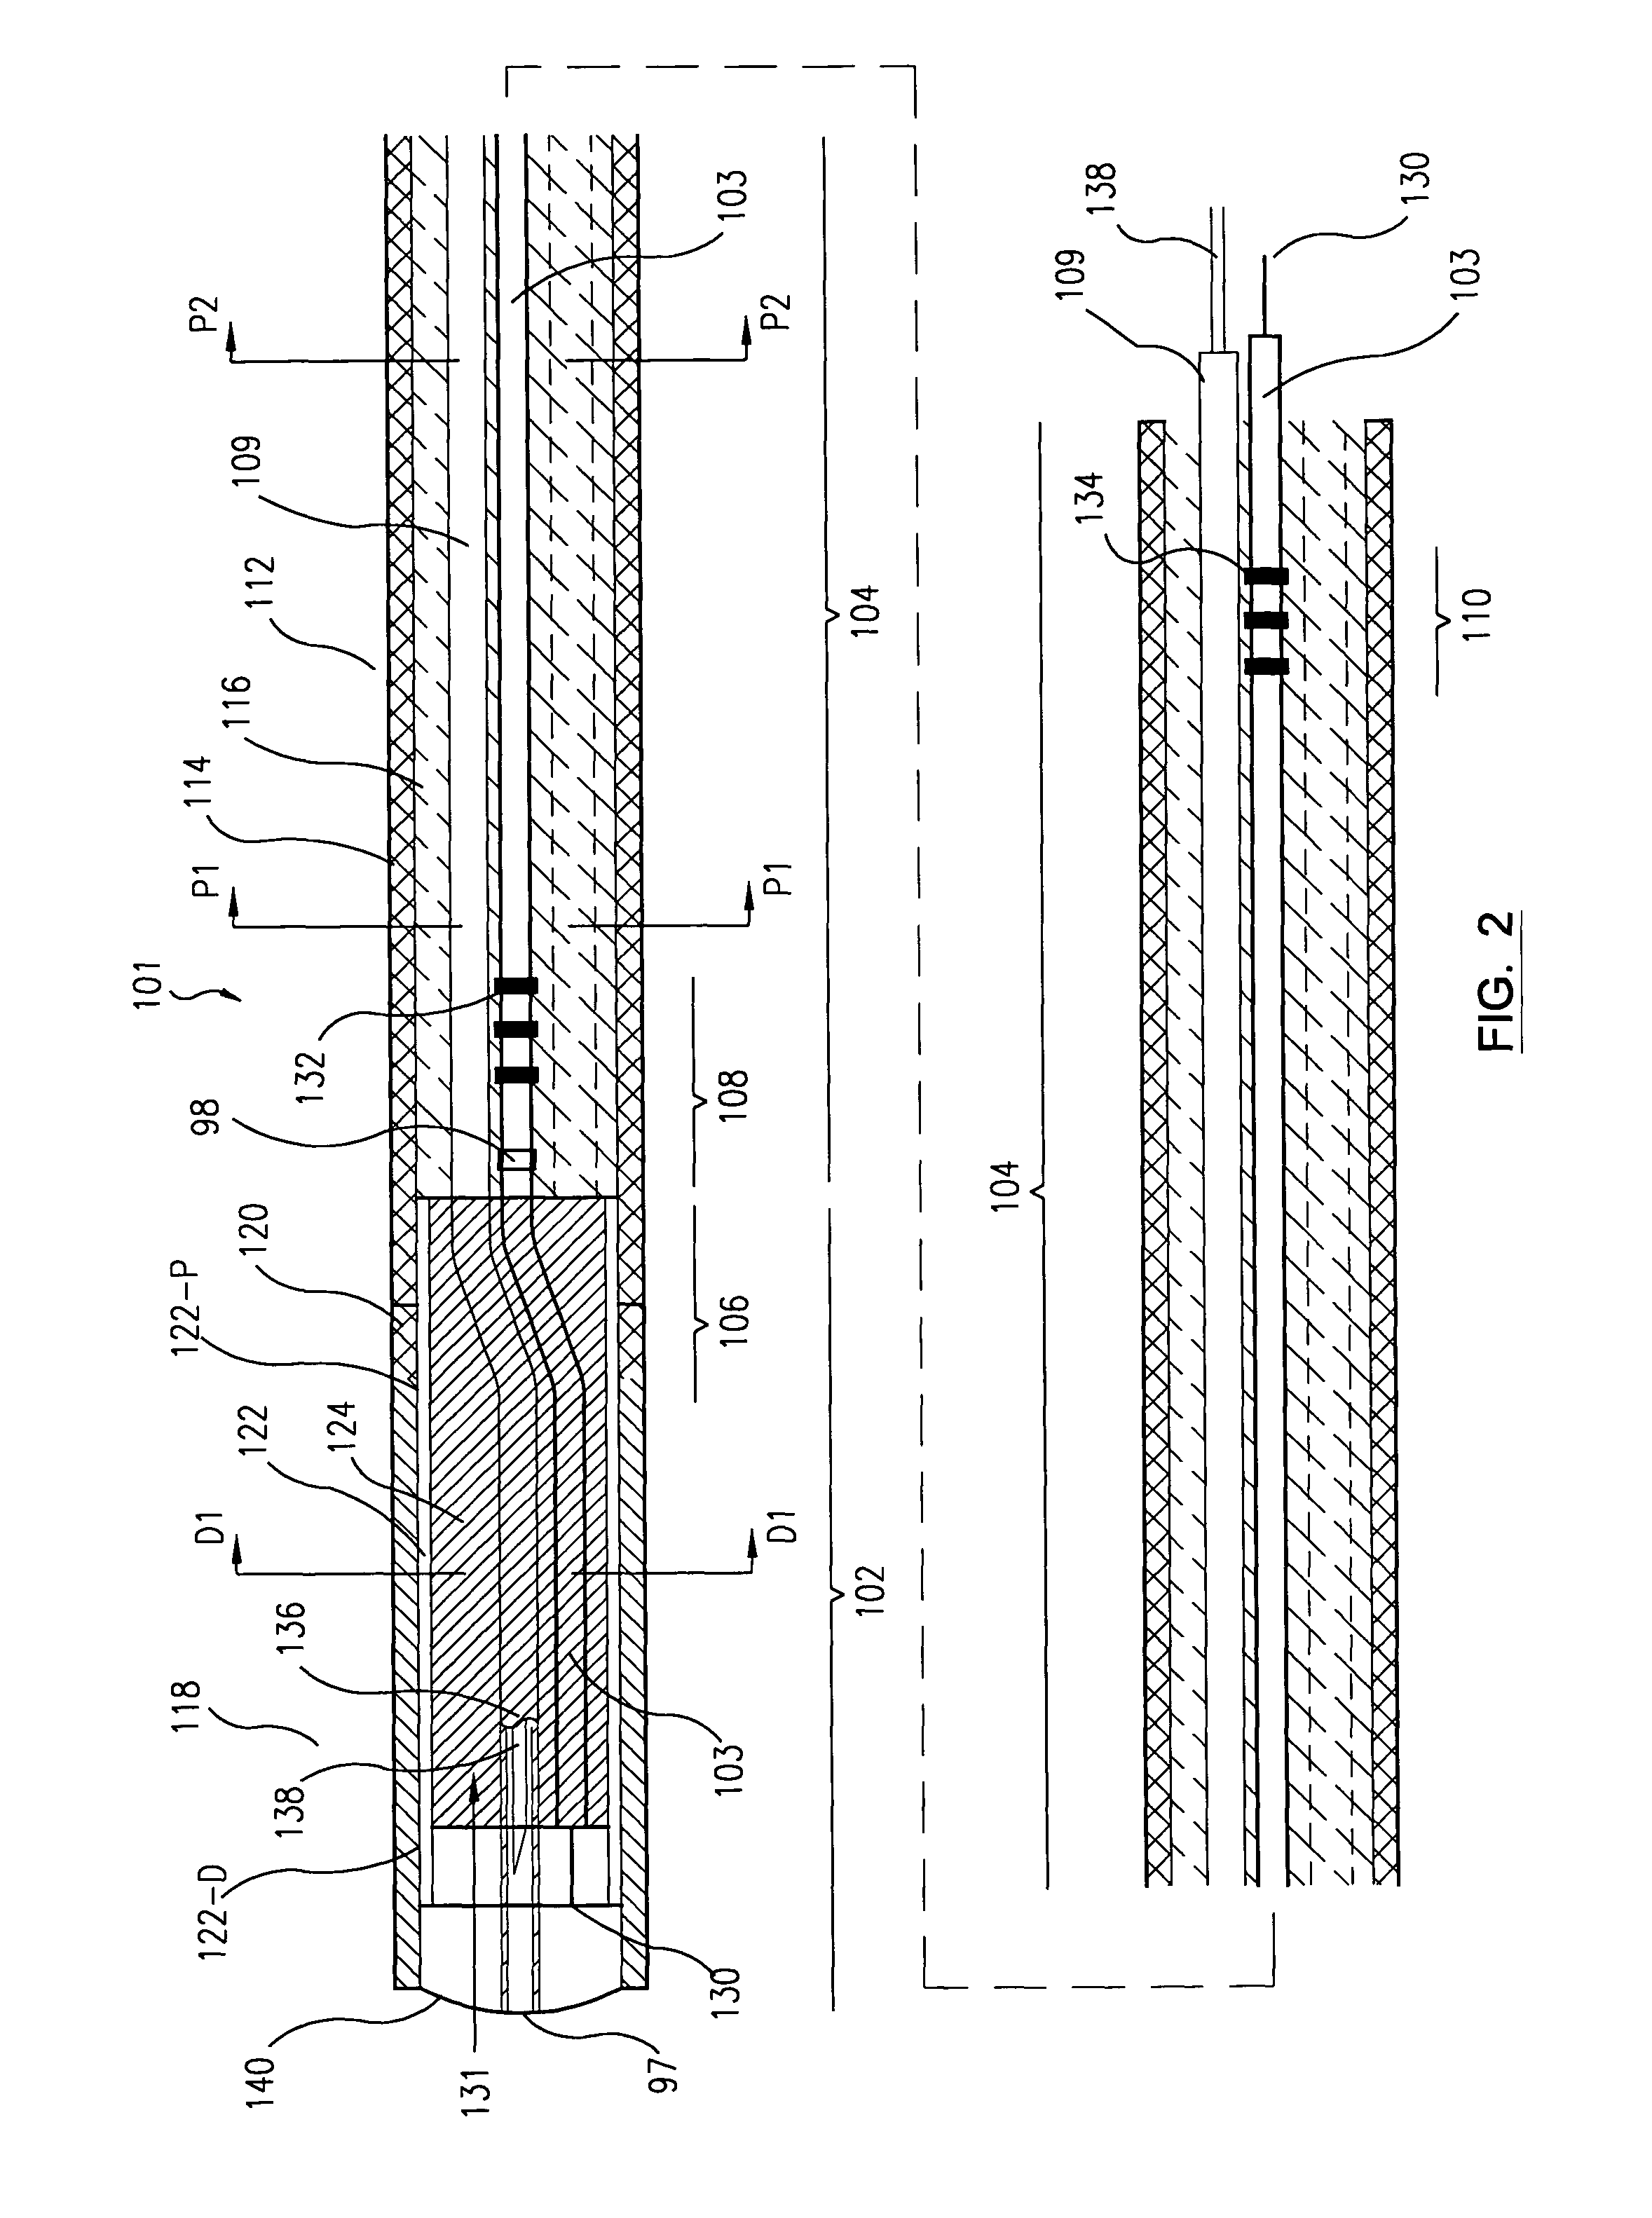 Deflectable catheter assembly and method of making same